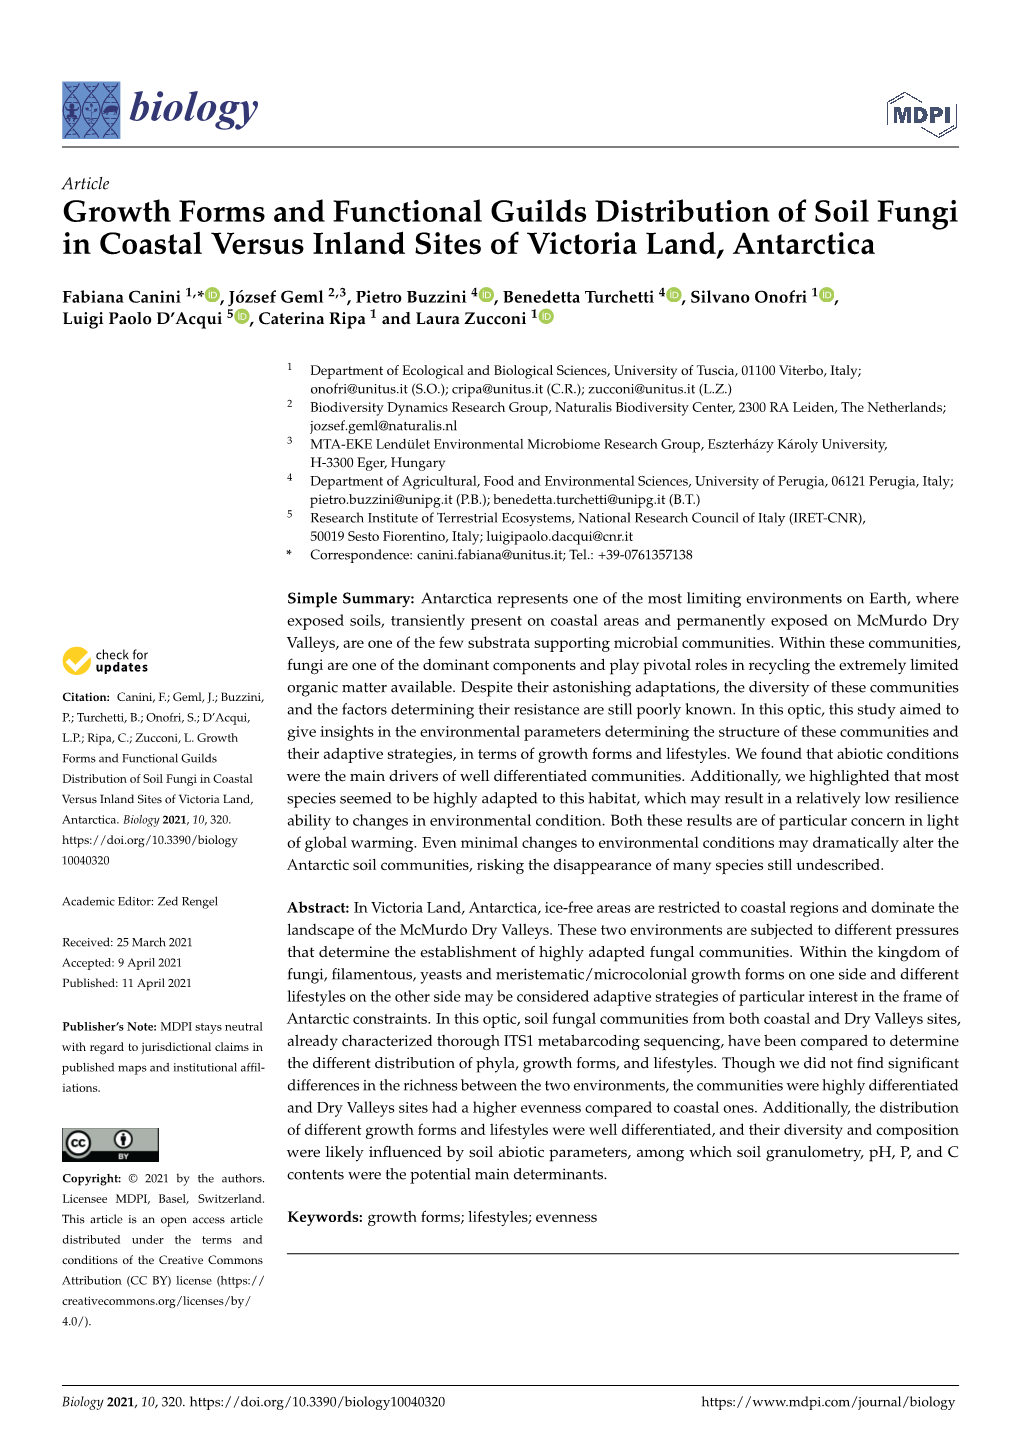 Growth Forms and Functional Guilds Distribution of Soil Fungi in Coastal Versus Inland Sites of Victoria Land, Antarctica